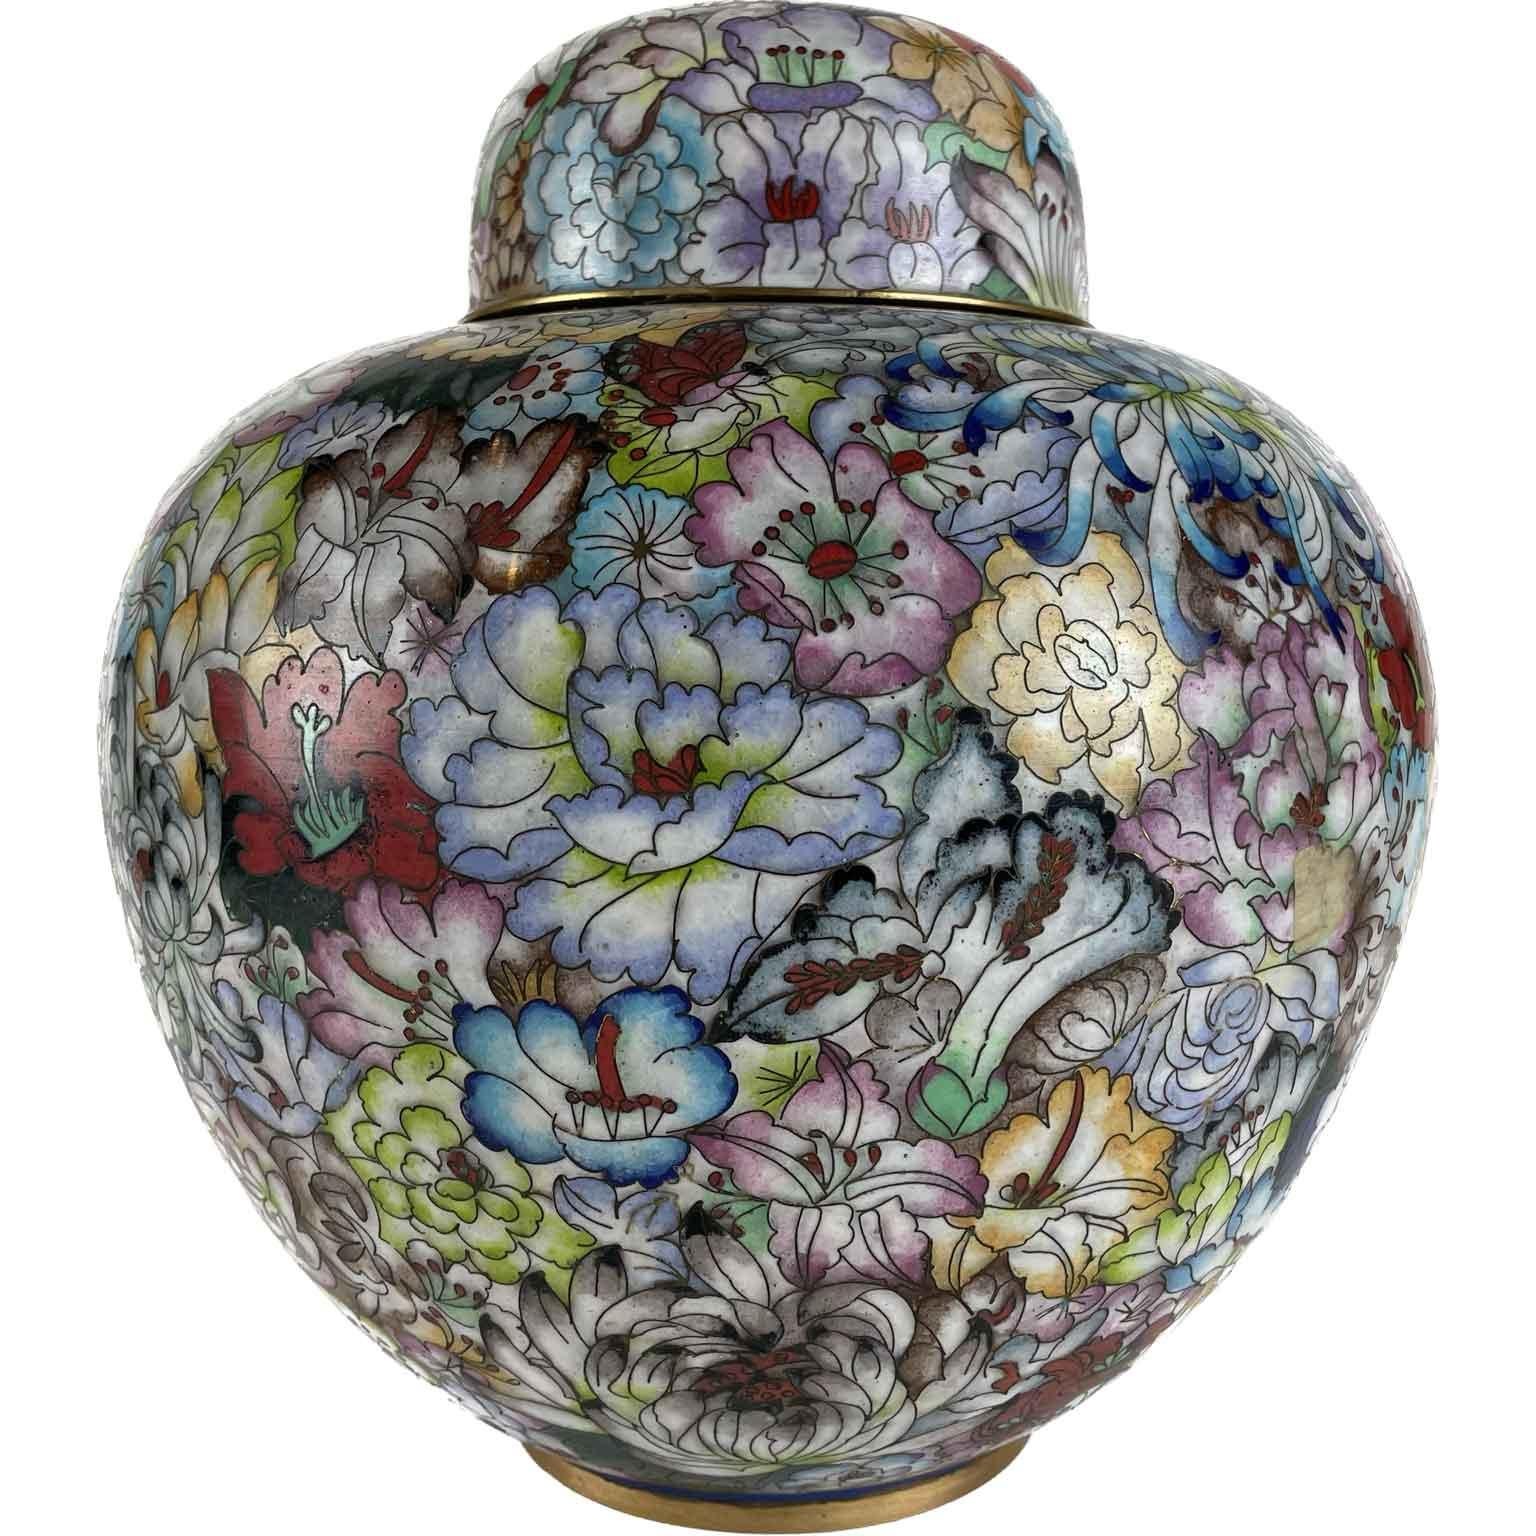 Cloisonné vase with lid with rich floral decoration, peonies and butterflies, light blue background of the  mid-twentieth century, of Chinese origin.  Belly-shaped,  of remarkable quality the floral design the polychrome coloring of the enamels.